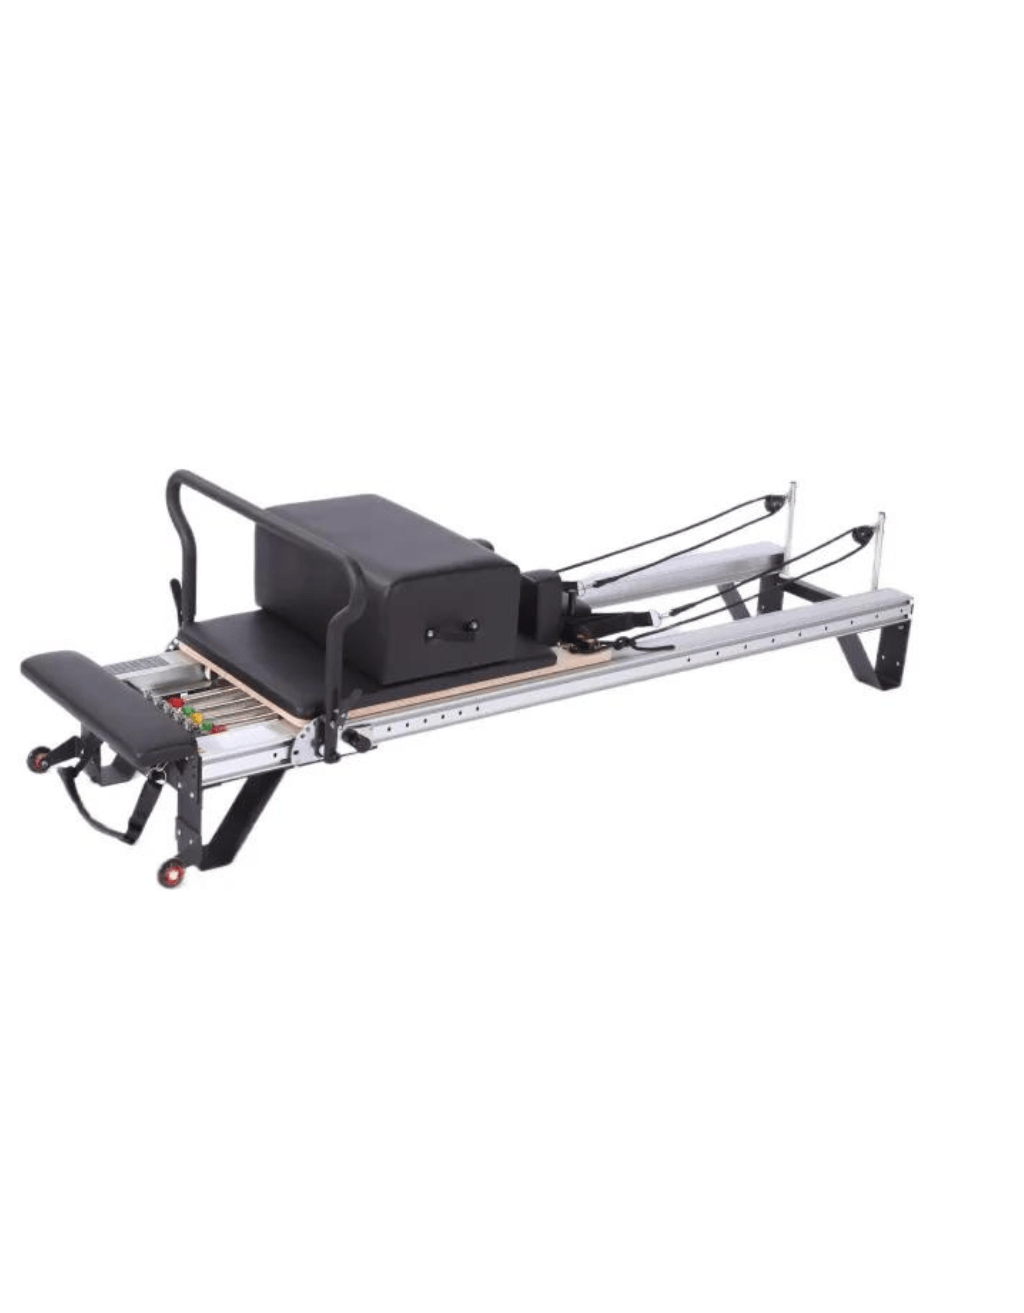 Hot Selling Pilates Aluminium Reformer Foldable Reformer Manufacturers and  Factory China - Customized Products Wholesale - Leader Fitness